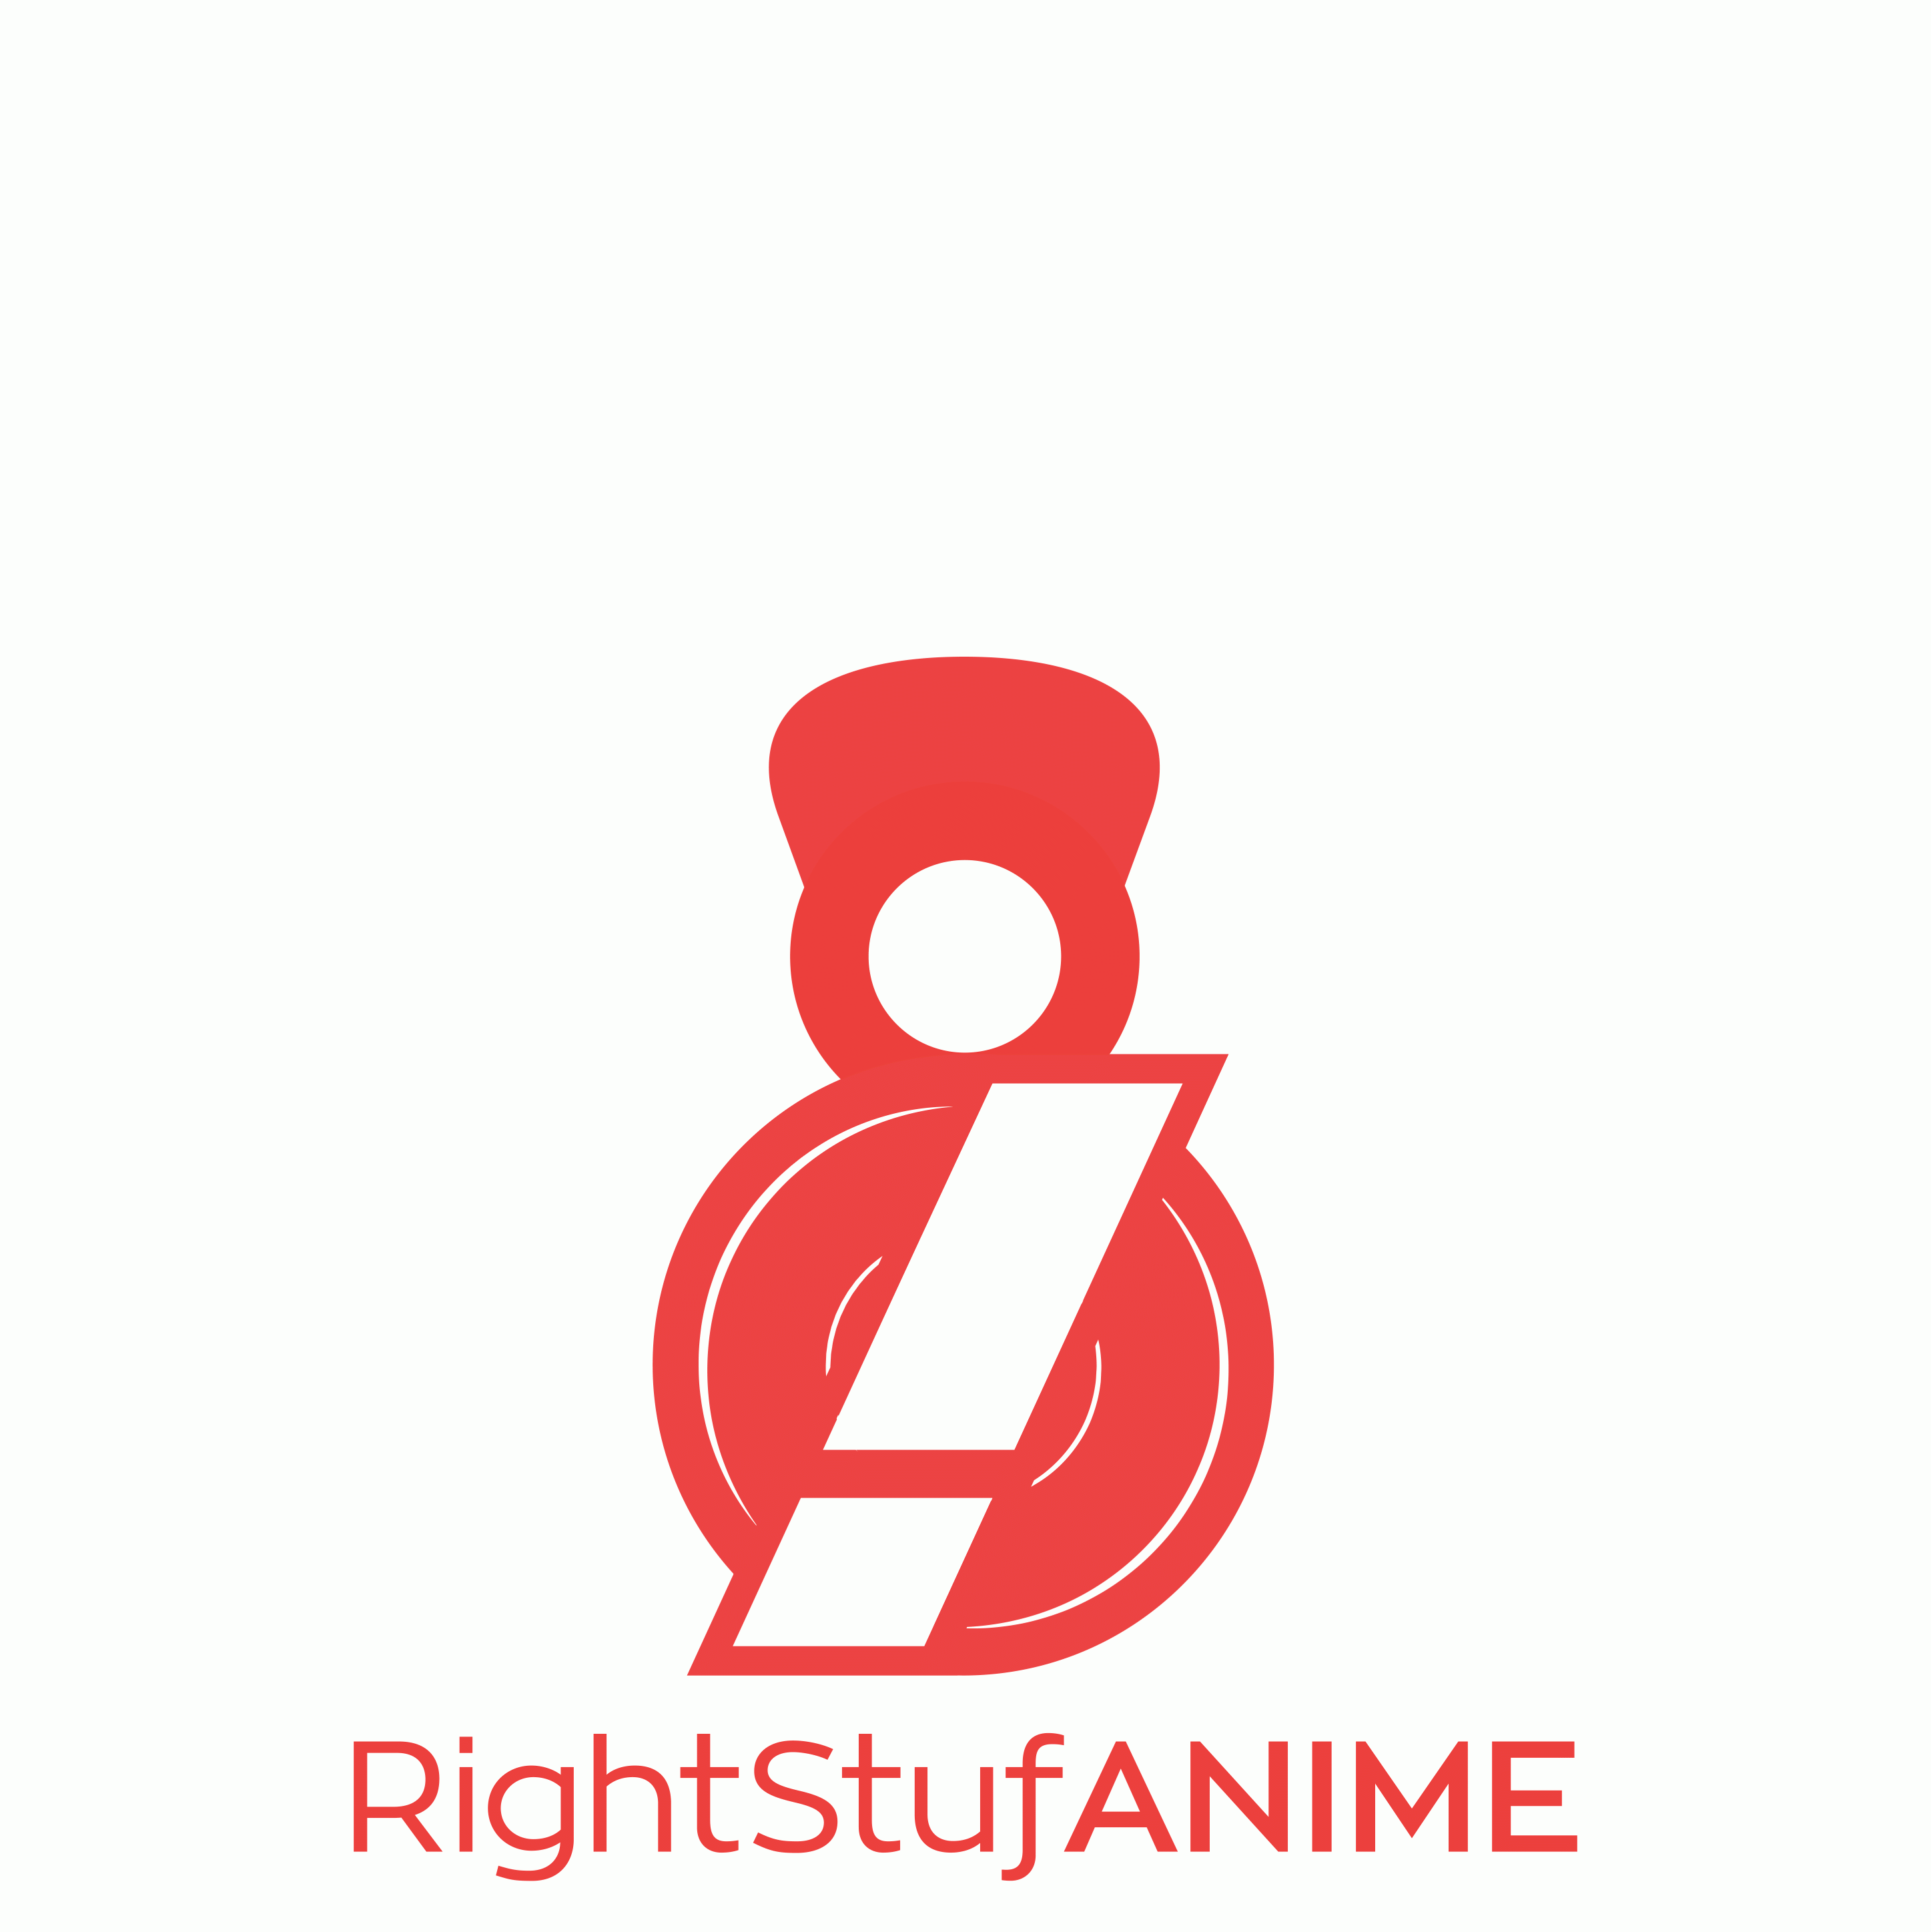 RightStufAnime is Officially Being SHUT DOWN. - YouTube